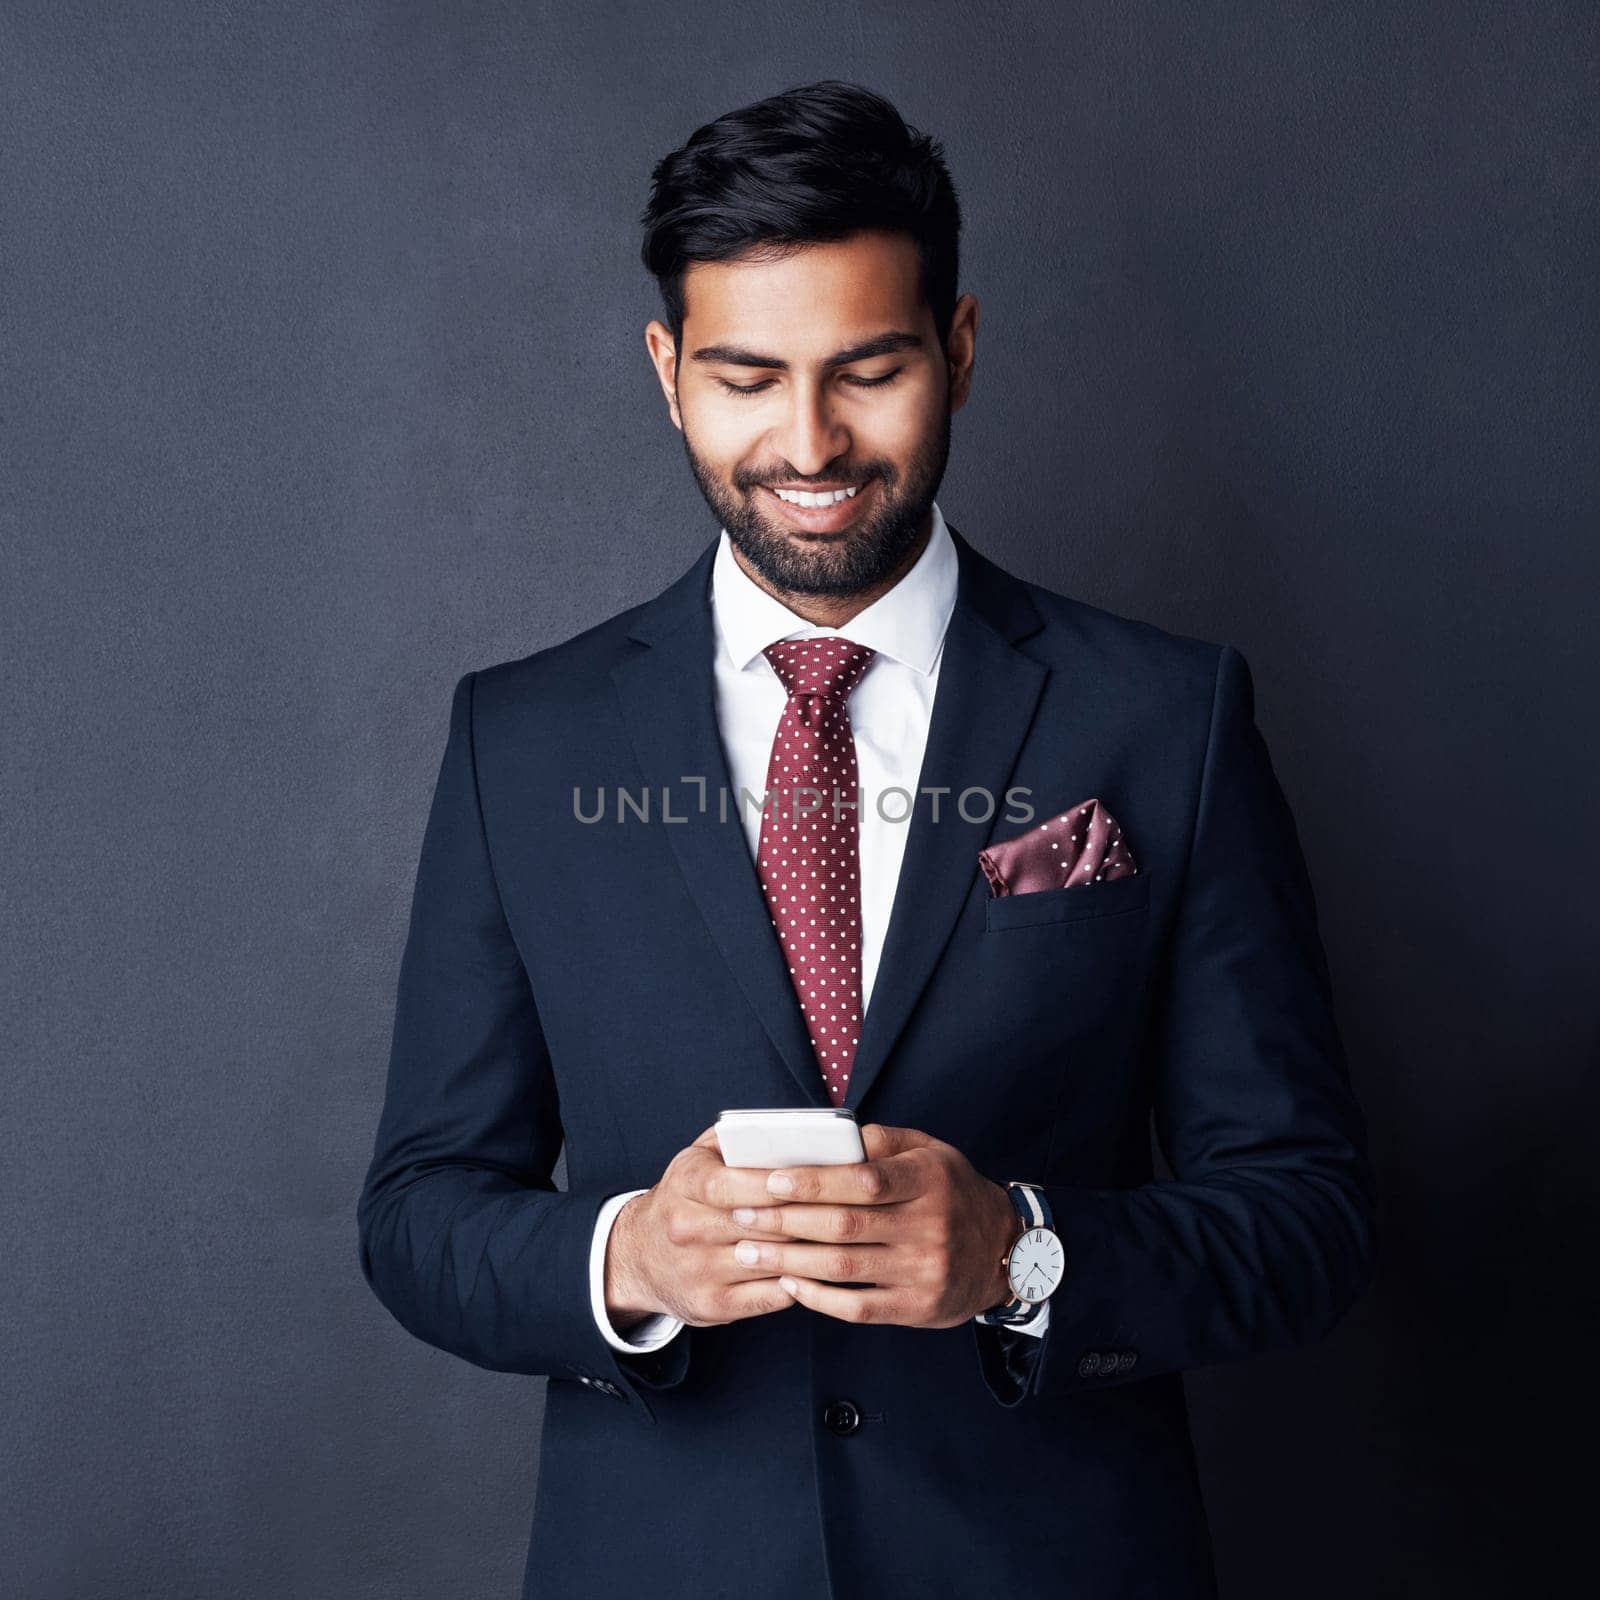 Keeping his career on track by staying connected. Studio shot of a young businessman using a mobile phone against a gray background. by YuriArcurs